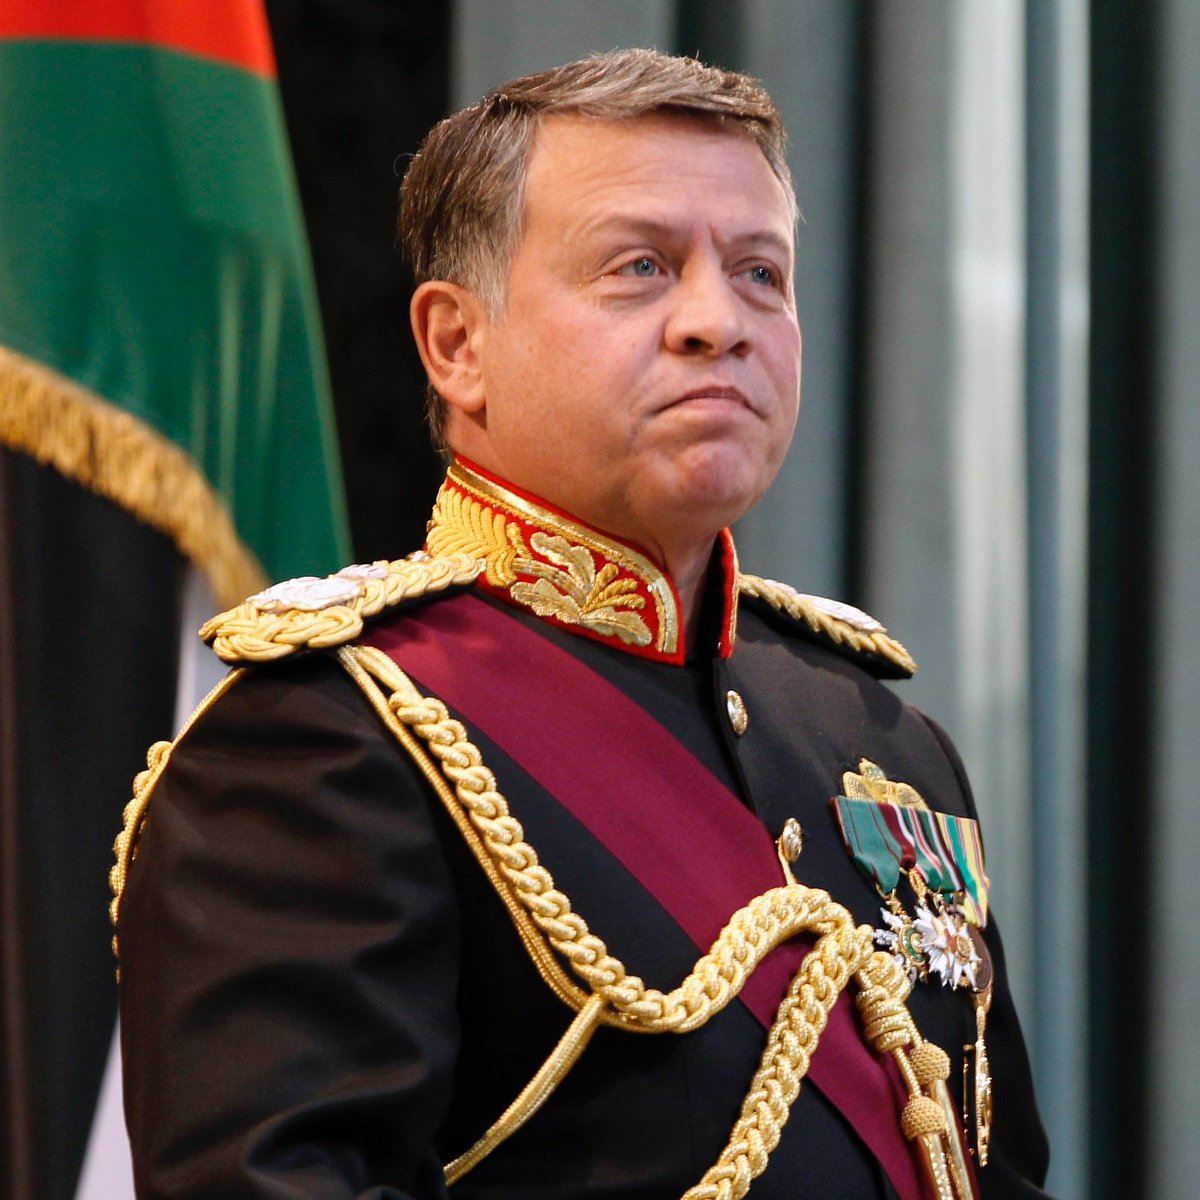 I respect the King of Jordan.

He chooses peace between Jordan and Israel.

Jihadi losers on this site are mad at him because he won't help Iran attack Israel. 

But Iranian-backed militias have been attacking Jordan for YEARS.